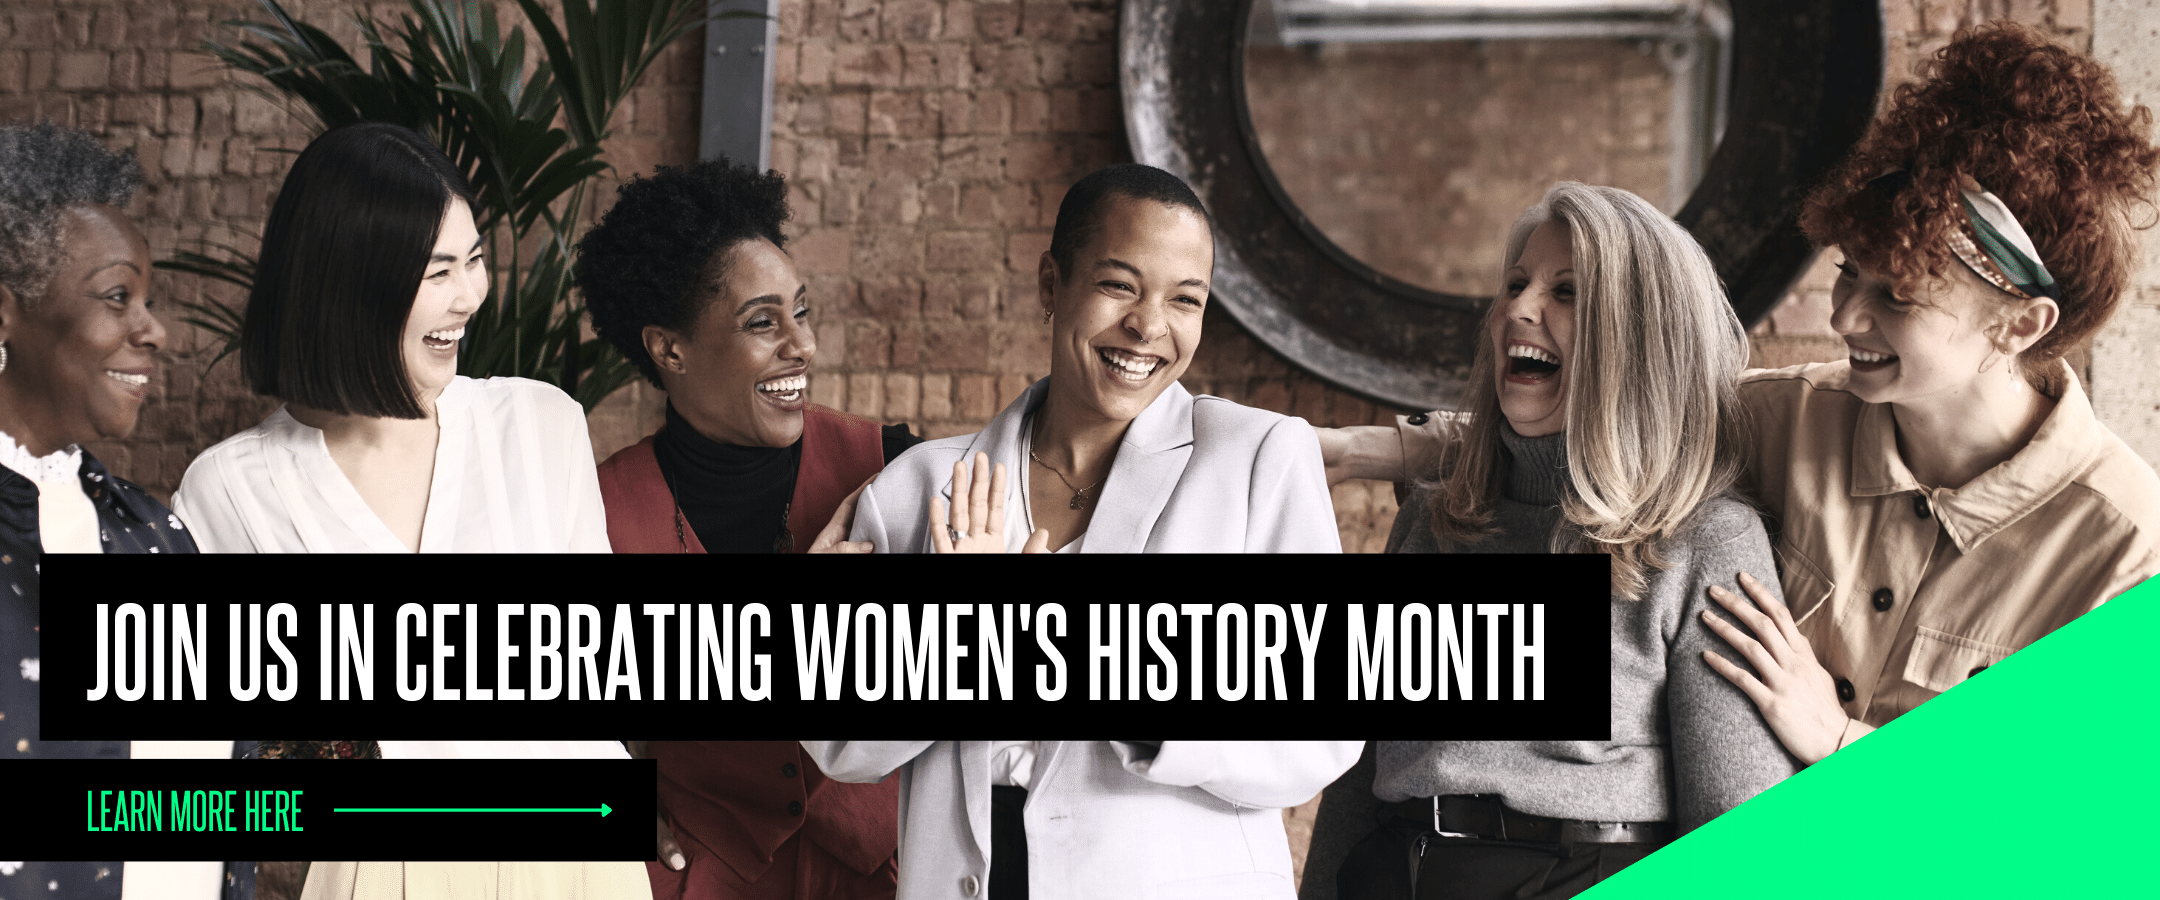 Six women of varying age and race smile and laugh together. Superimposed over the image are the words "Join us in celebrating Women's History Month" and an arrow trailing from the words "Learn how here"